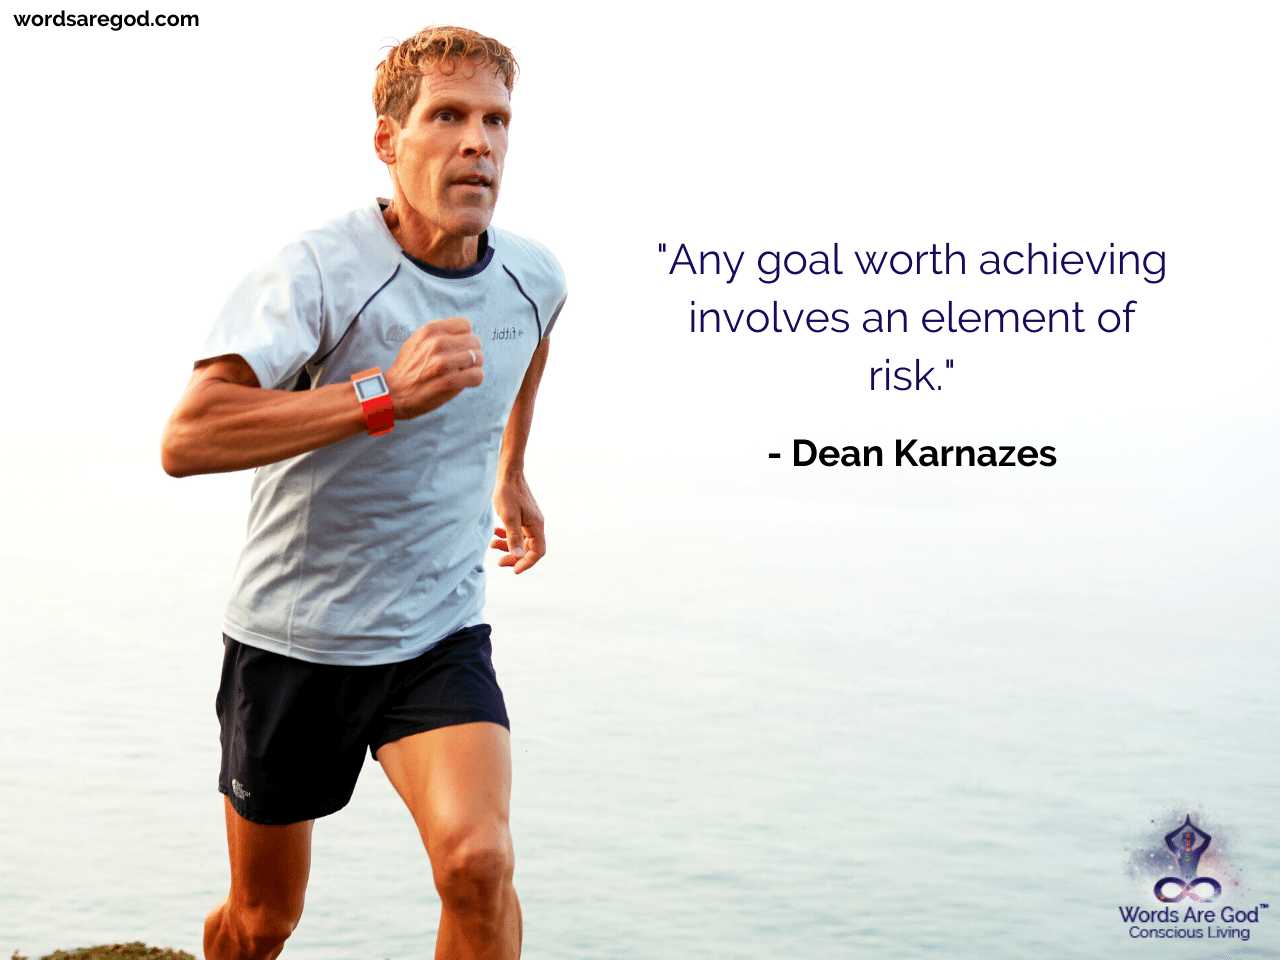 Dean Karnazes Inspirational Quote